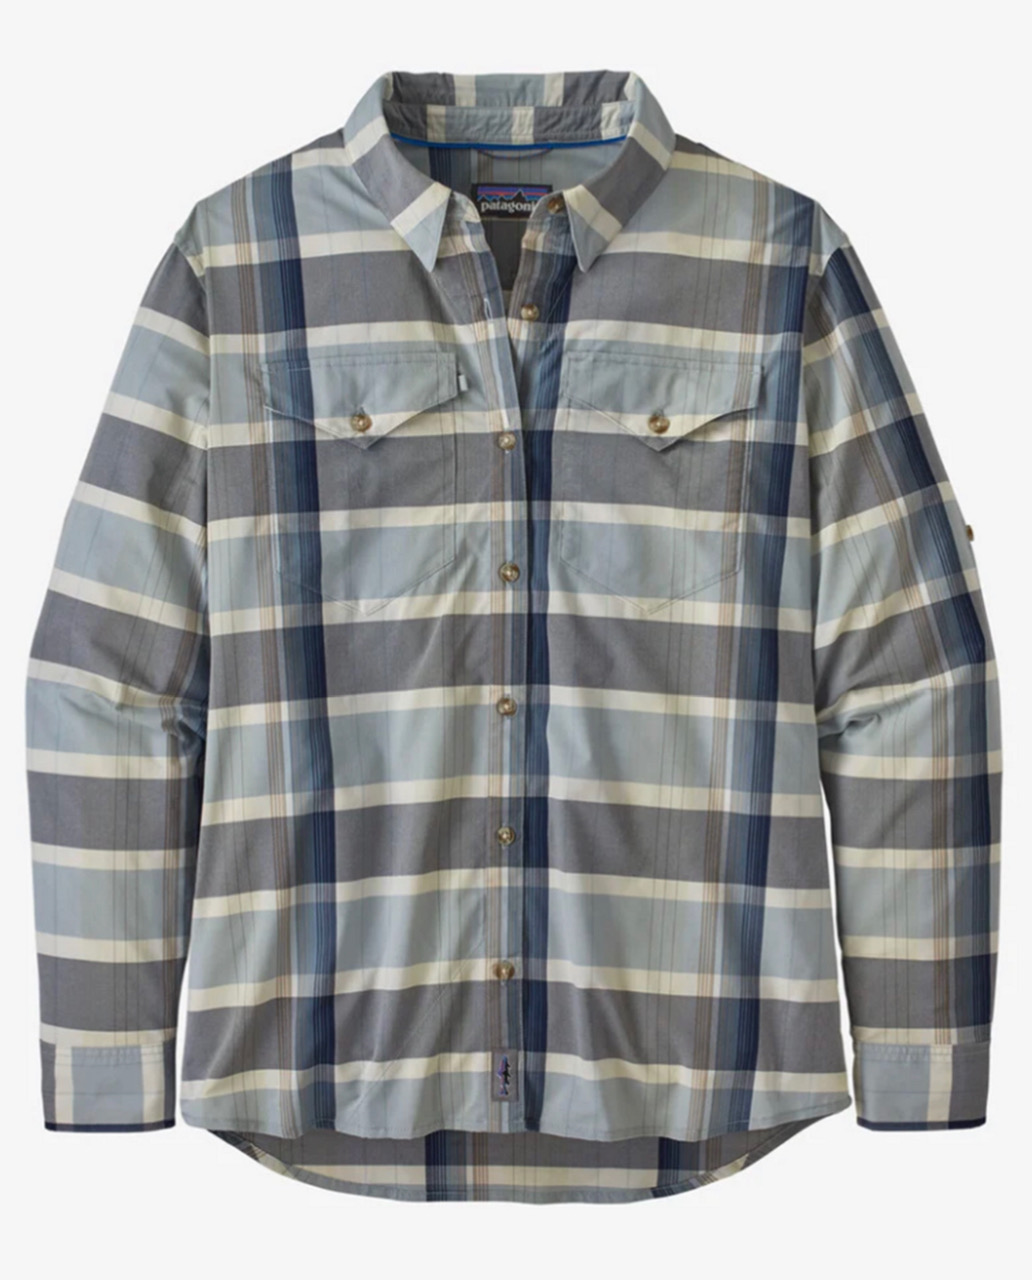 Patagonia W's L/S Sun Stretch Shirt - Cotton Seed: Berlin Blue - Extra Small